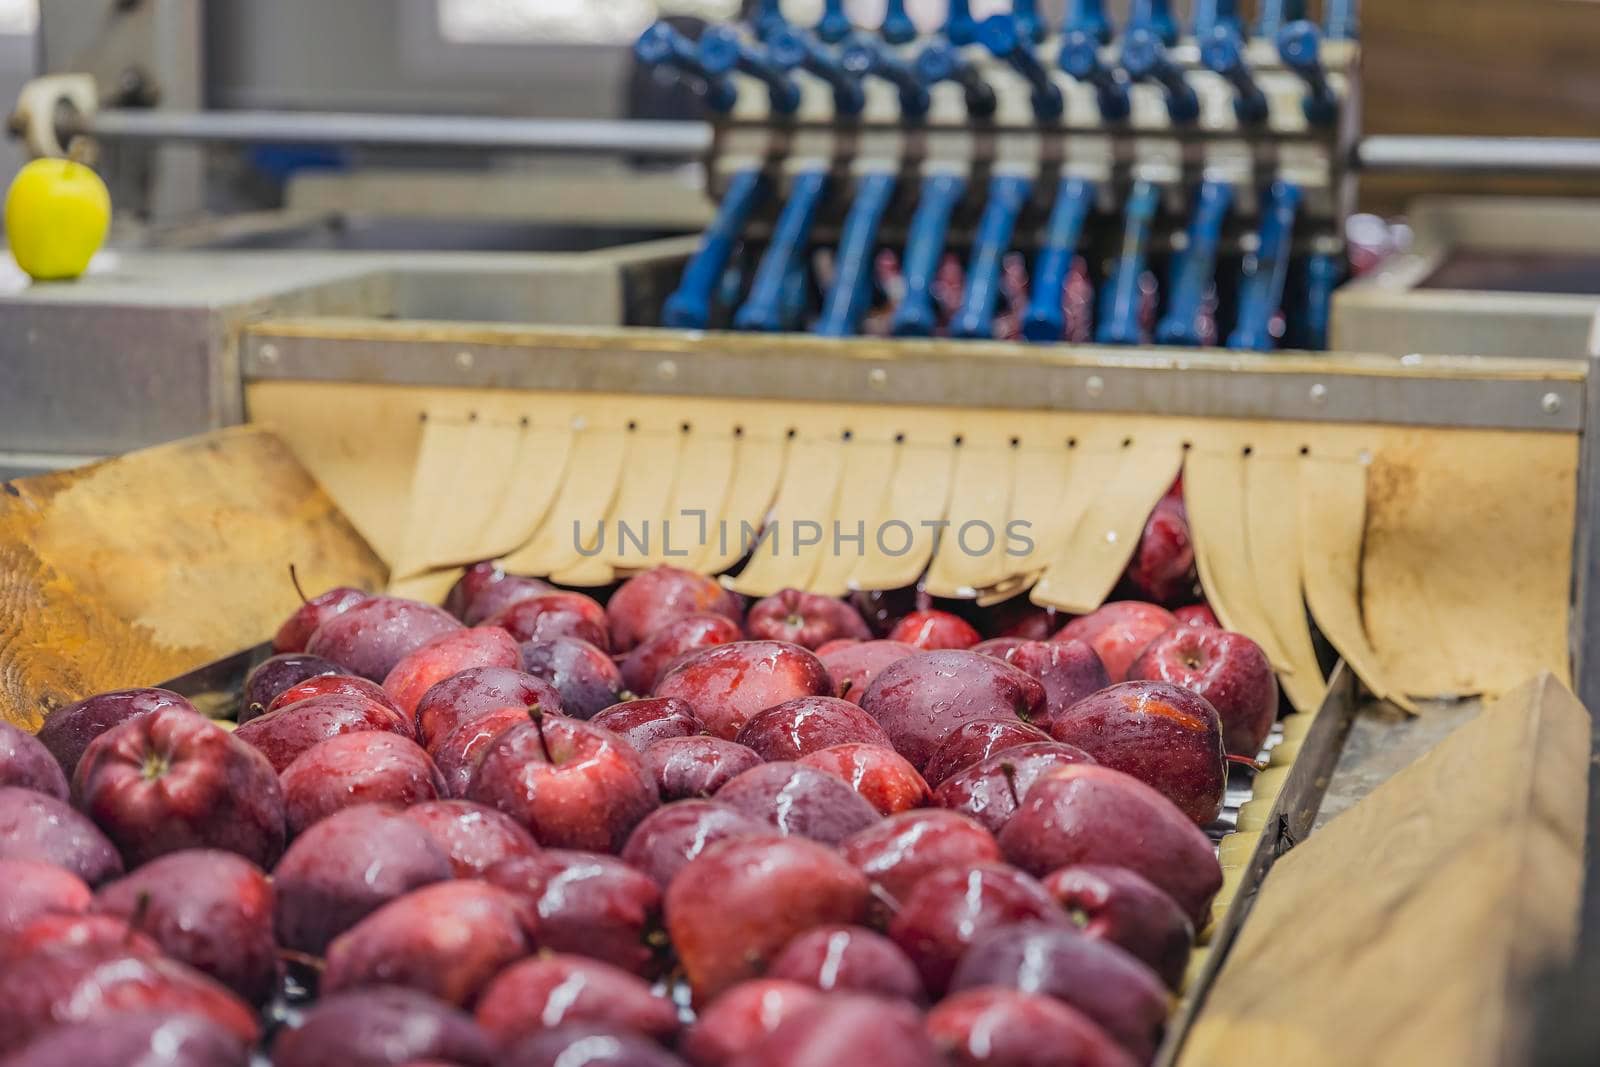 automatic movement of apples in the factory